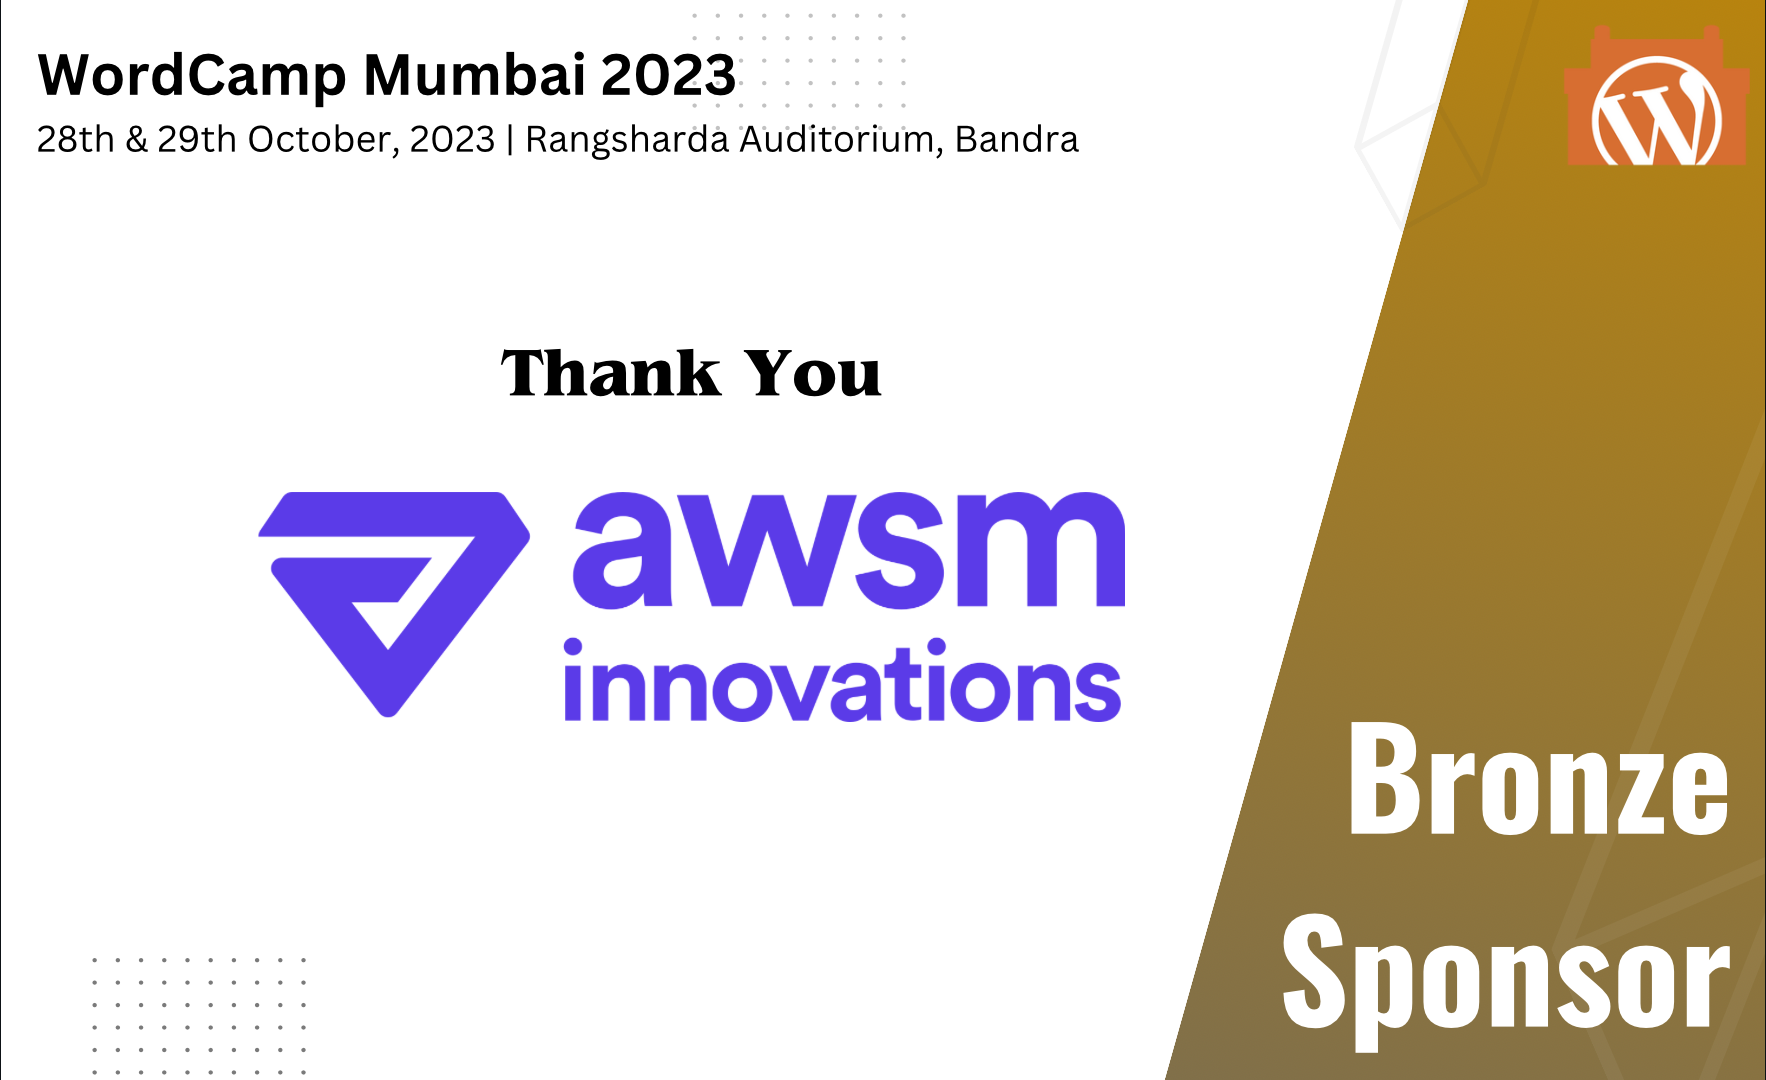 Thank You Awsm Innovations, for being our Bronze Sponsor